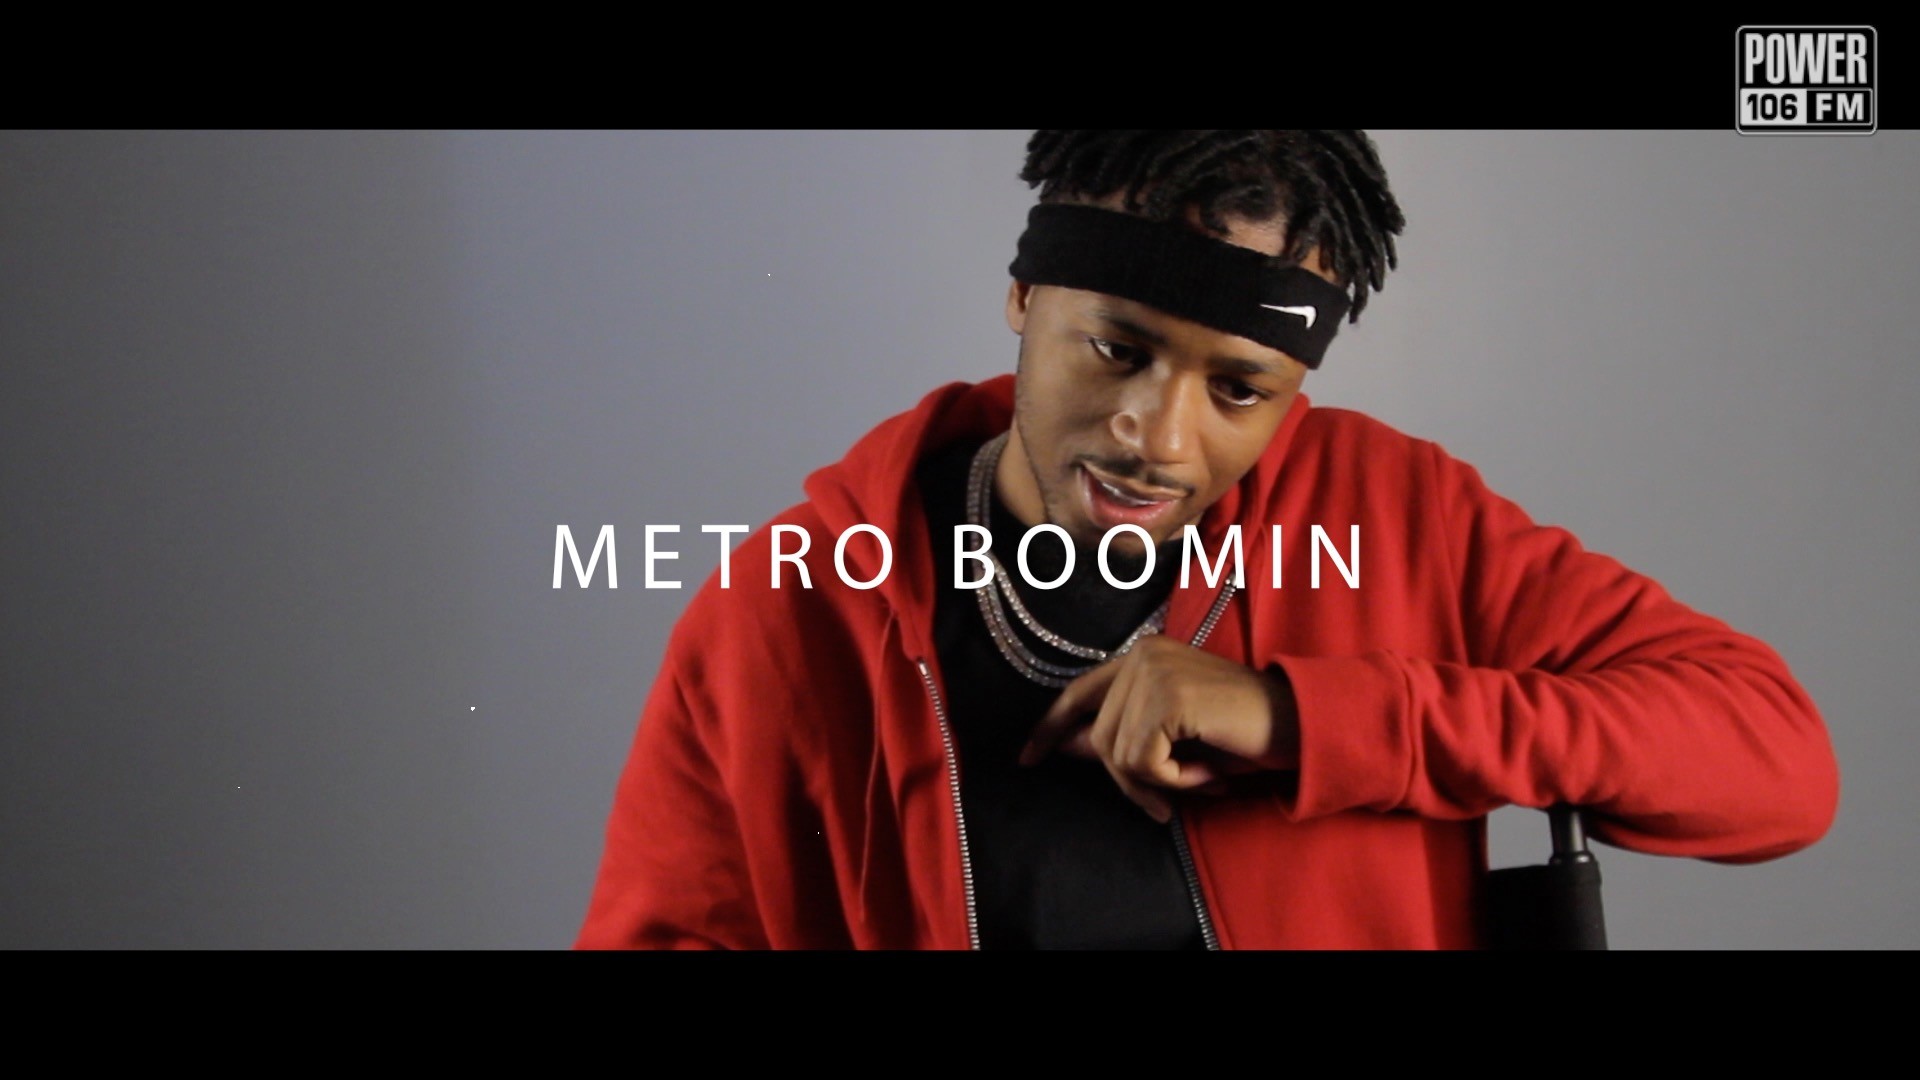 1920x1080 Metro Boomin Speaks On Favorite Projects & Gives Advice For Young Producers  [WATCH] | Power 106 | #1 For Hip Hop